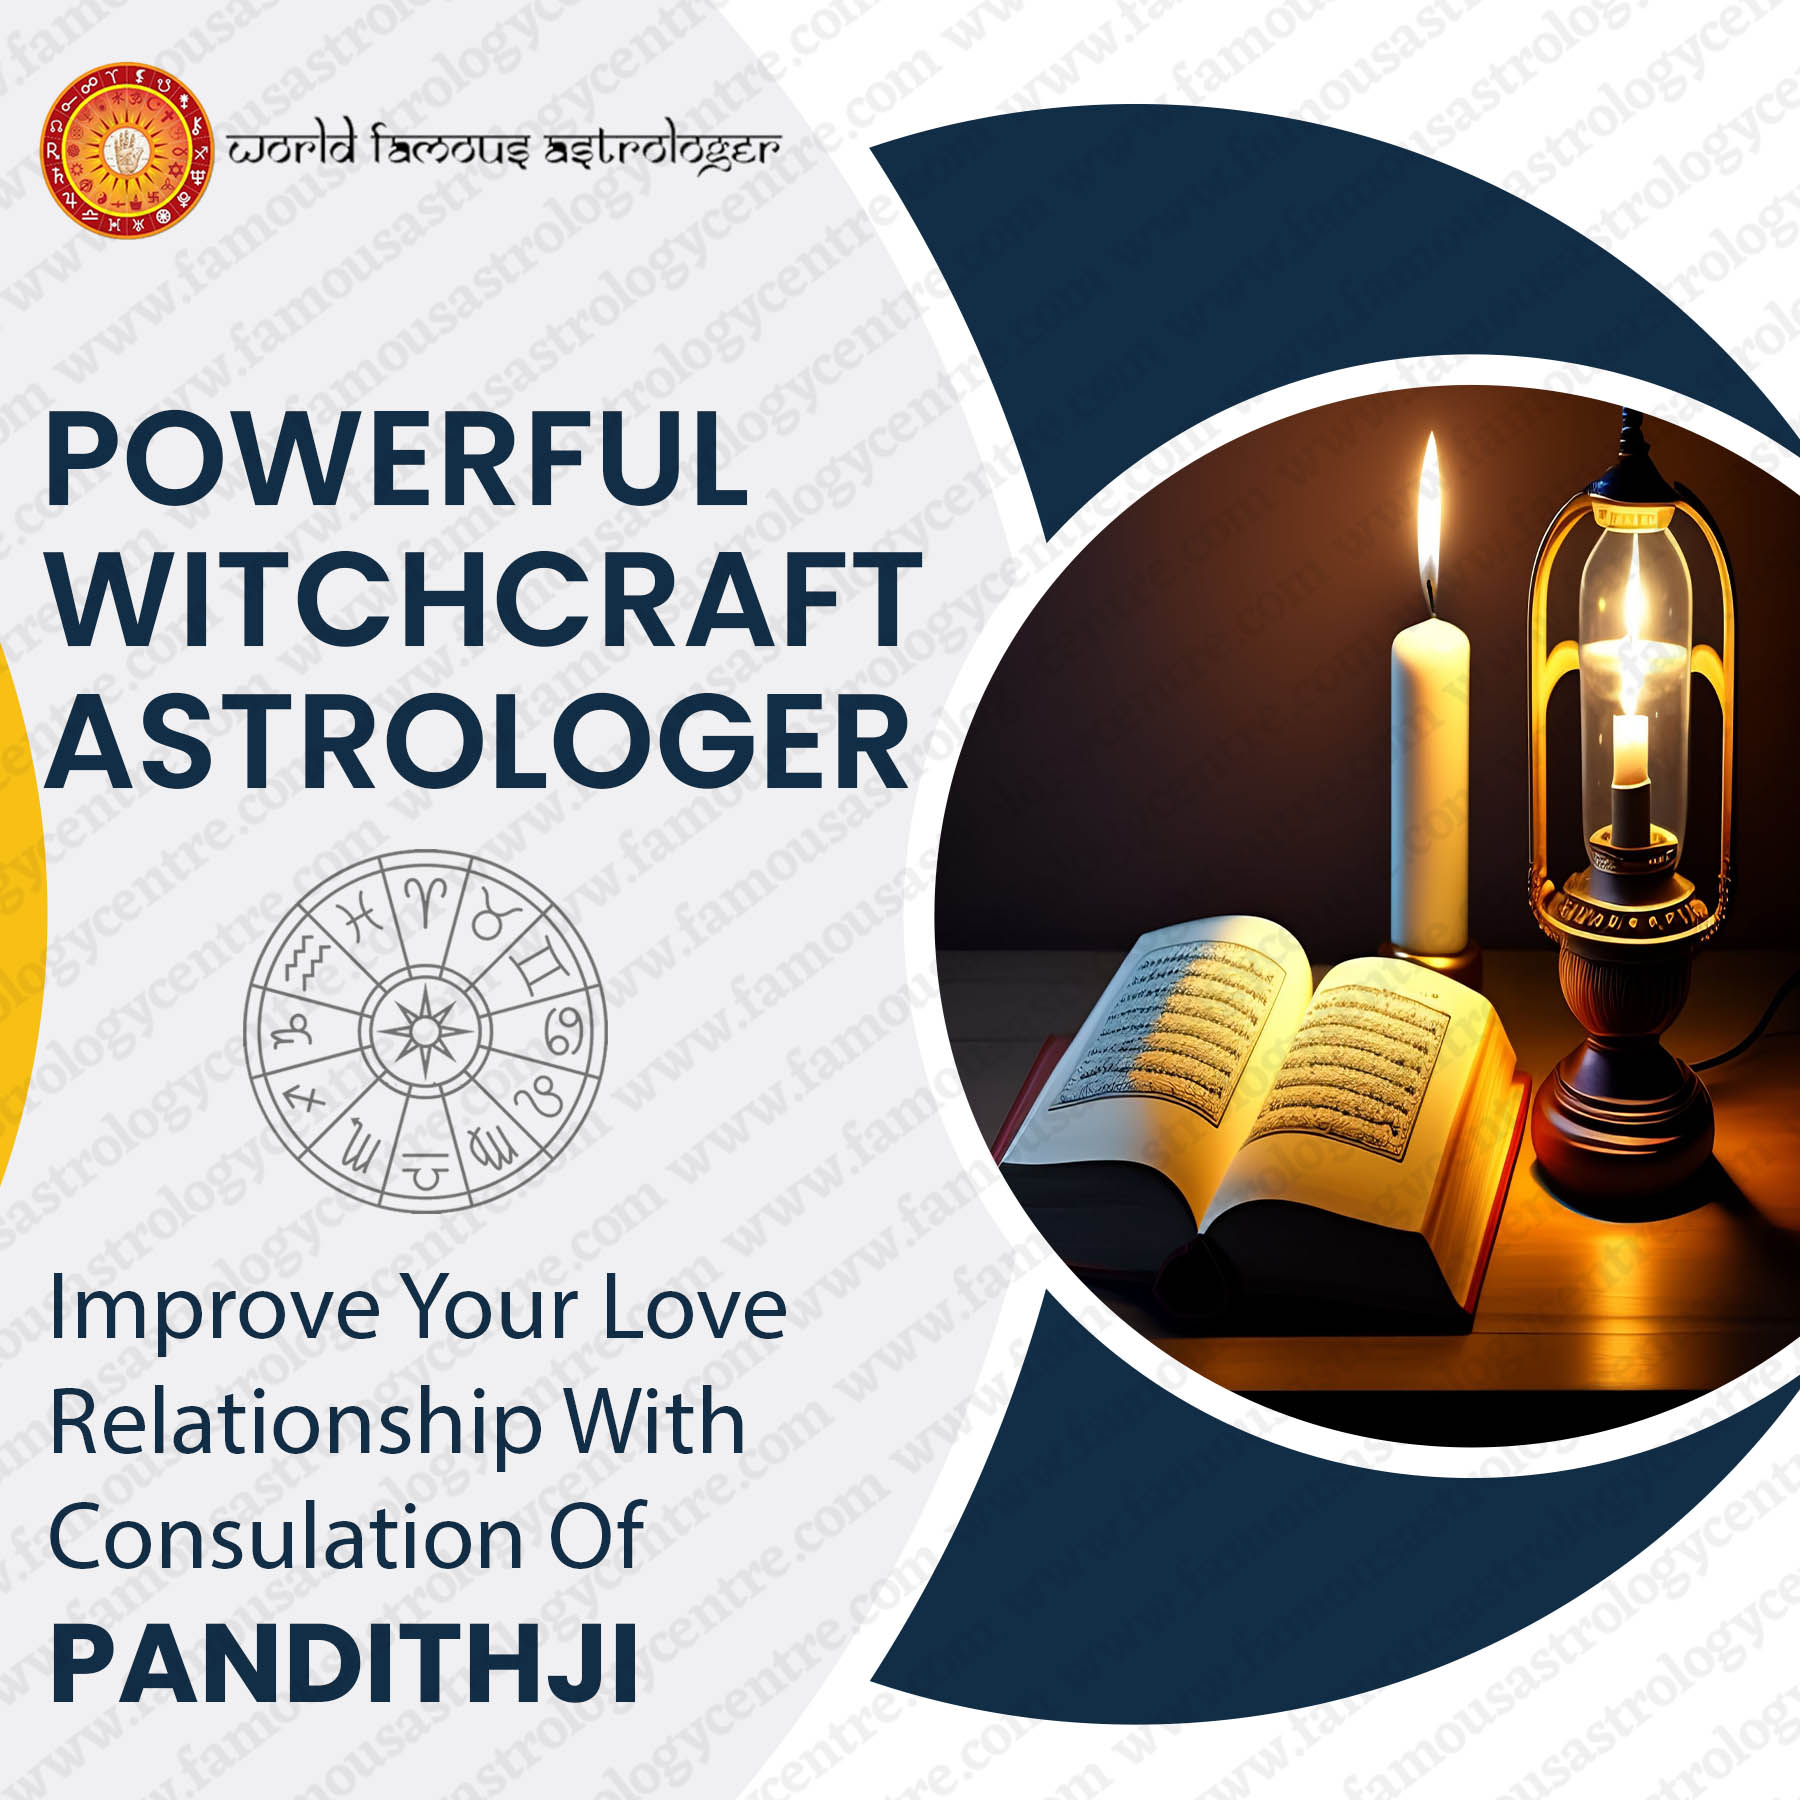 Powerful Witchcraft Astrologer